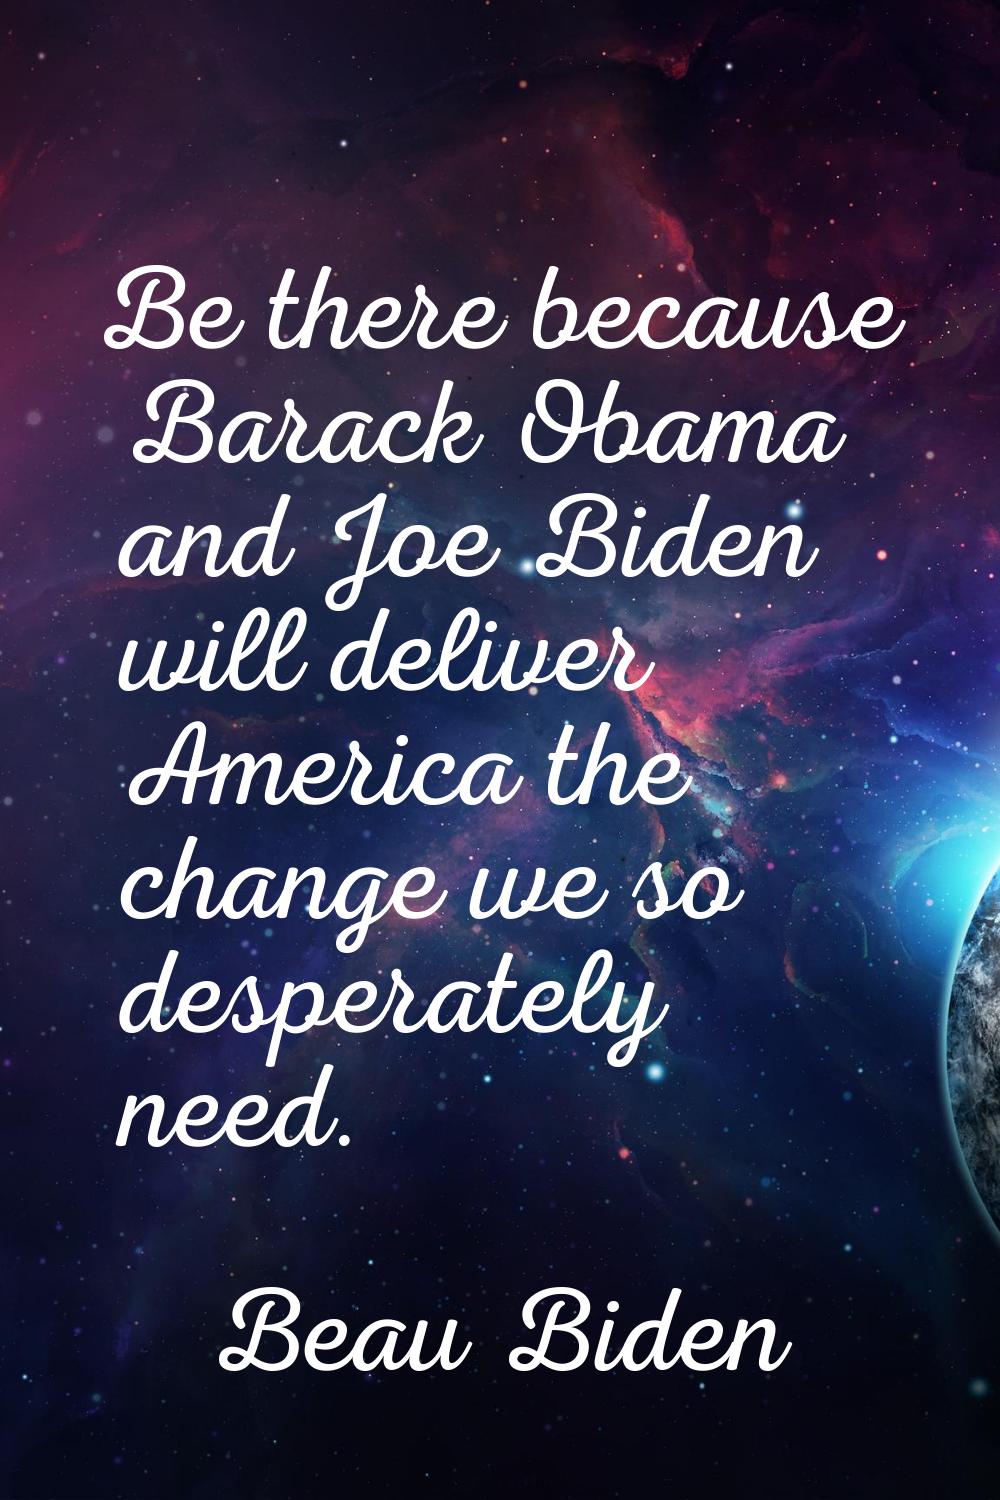 Be there because Barack Obama and Joe Biden will deliver America the change we so desperately need.